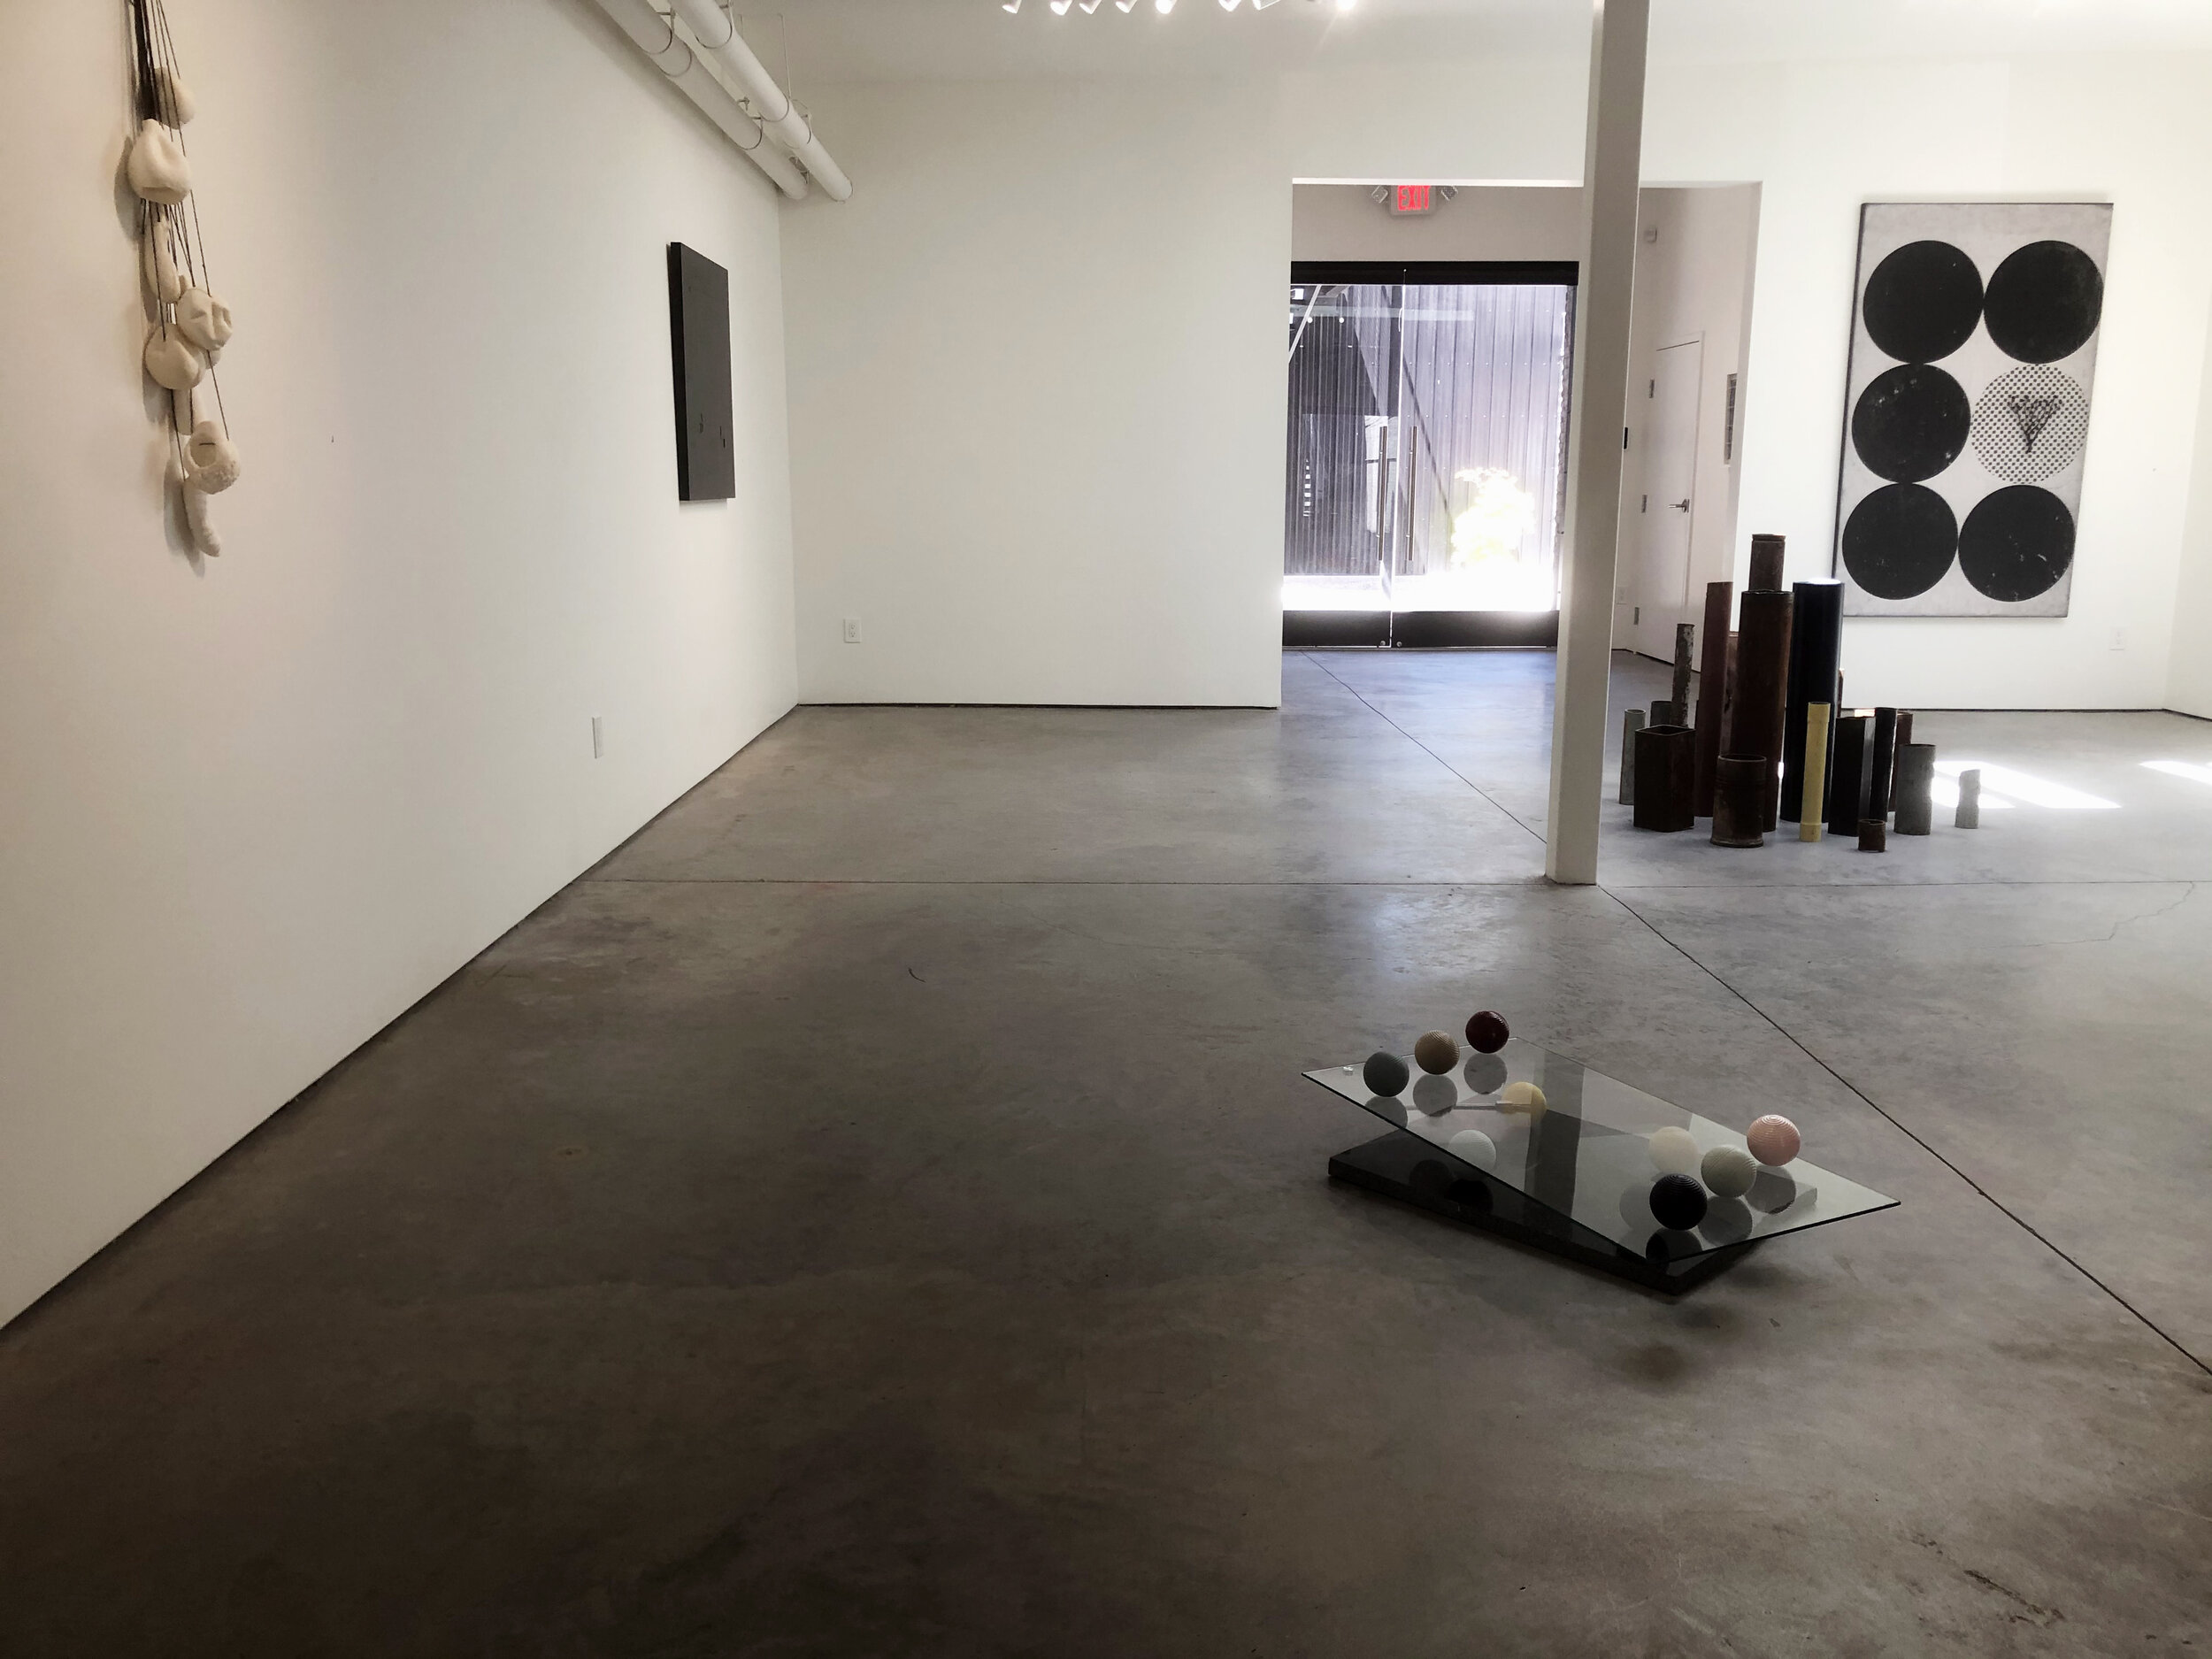  Quappi Projects, June - July 2020  Louisville, KY  Gall Blass, Genital Nubs, Spring Themes   